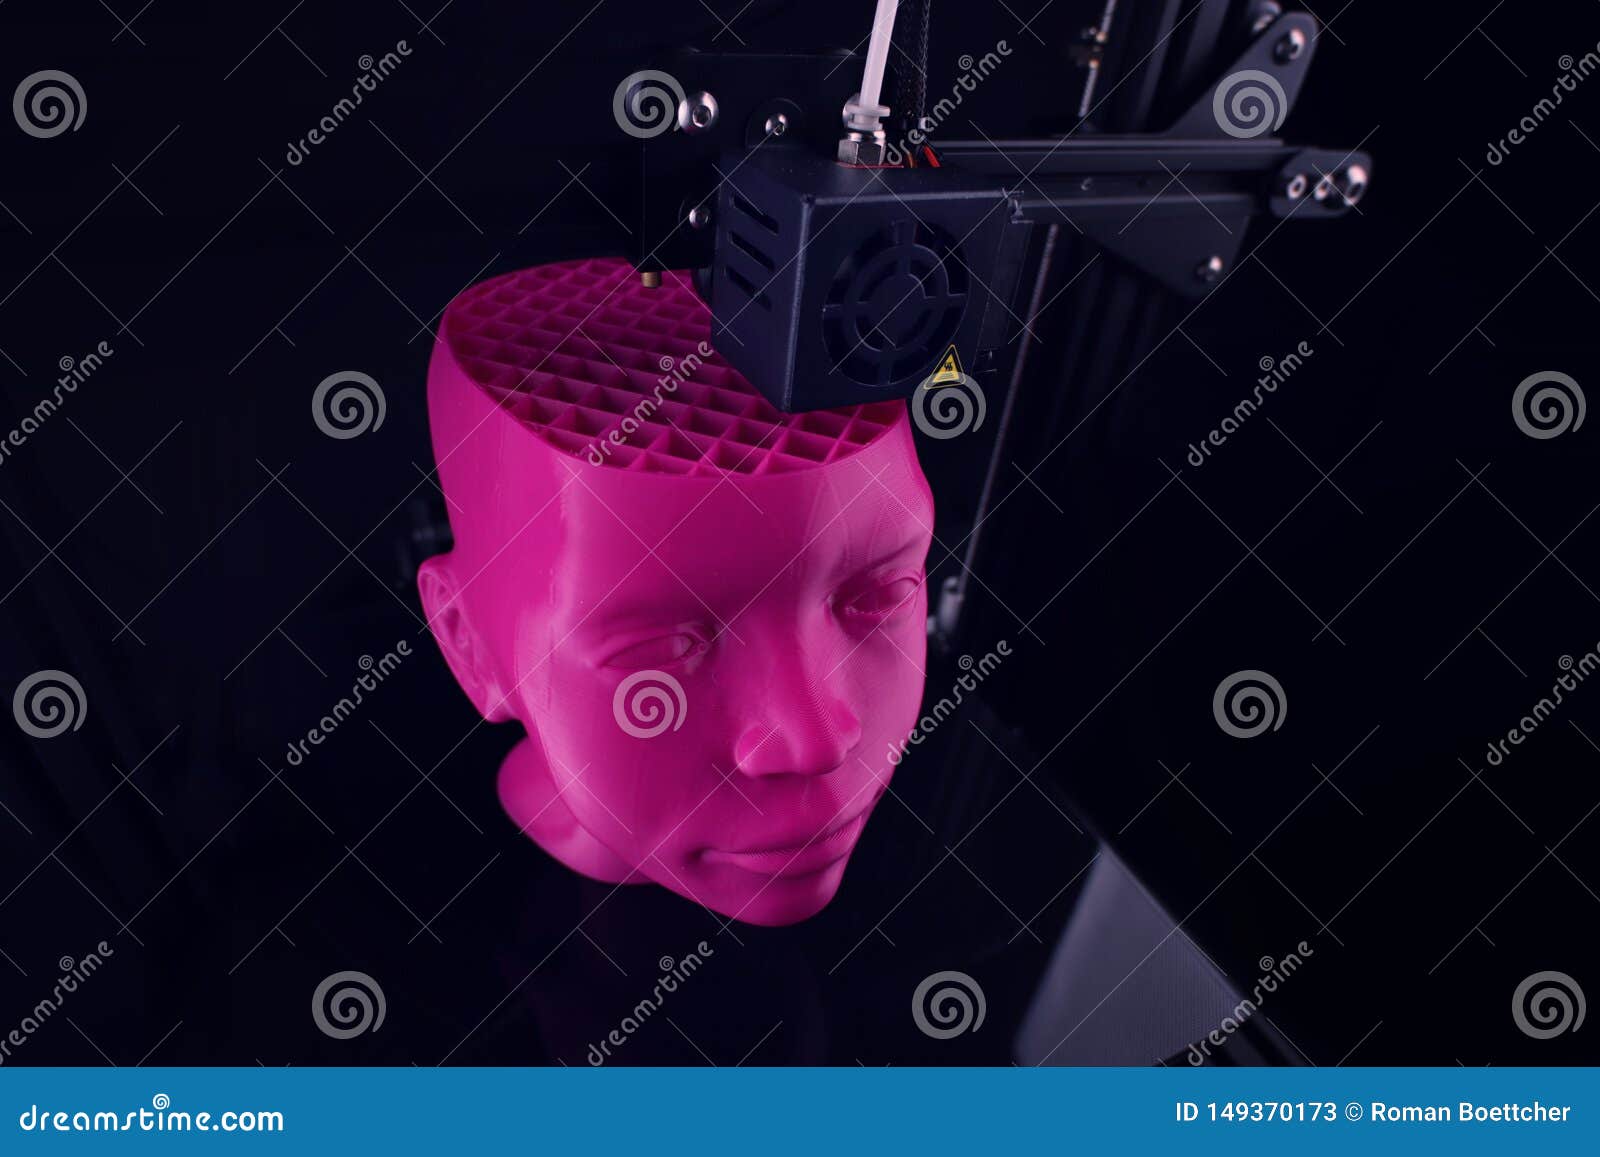 a 3d printer produces a futuristic sculptural humanoid head from pink plastic in foggy light.